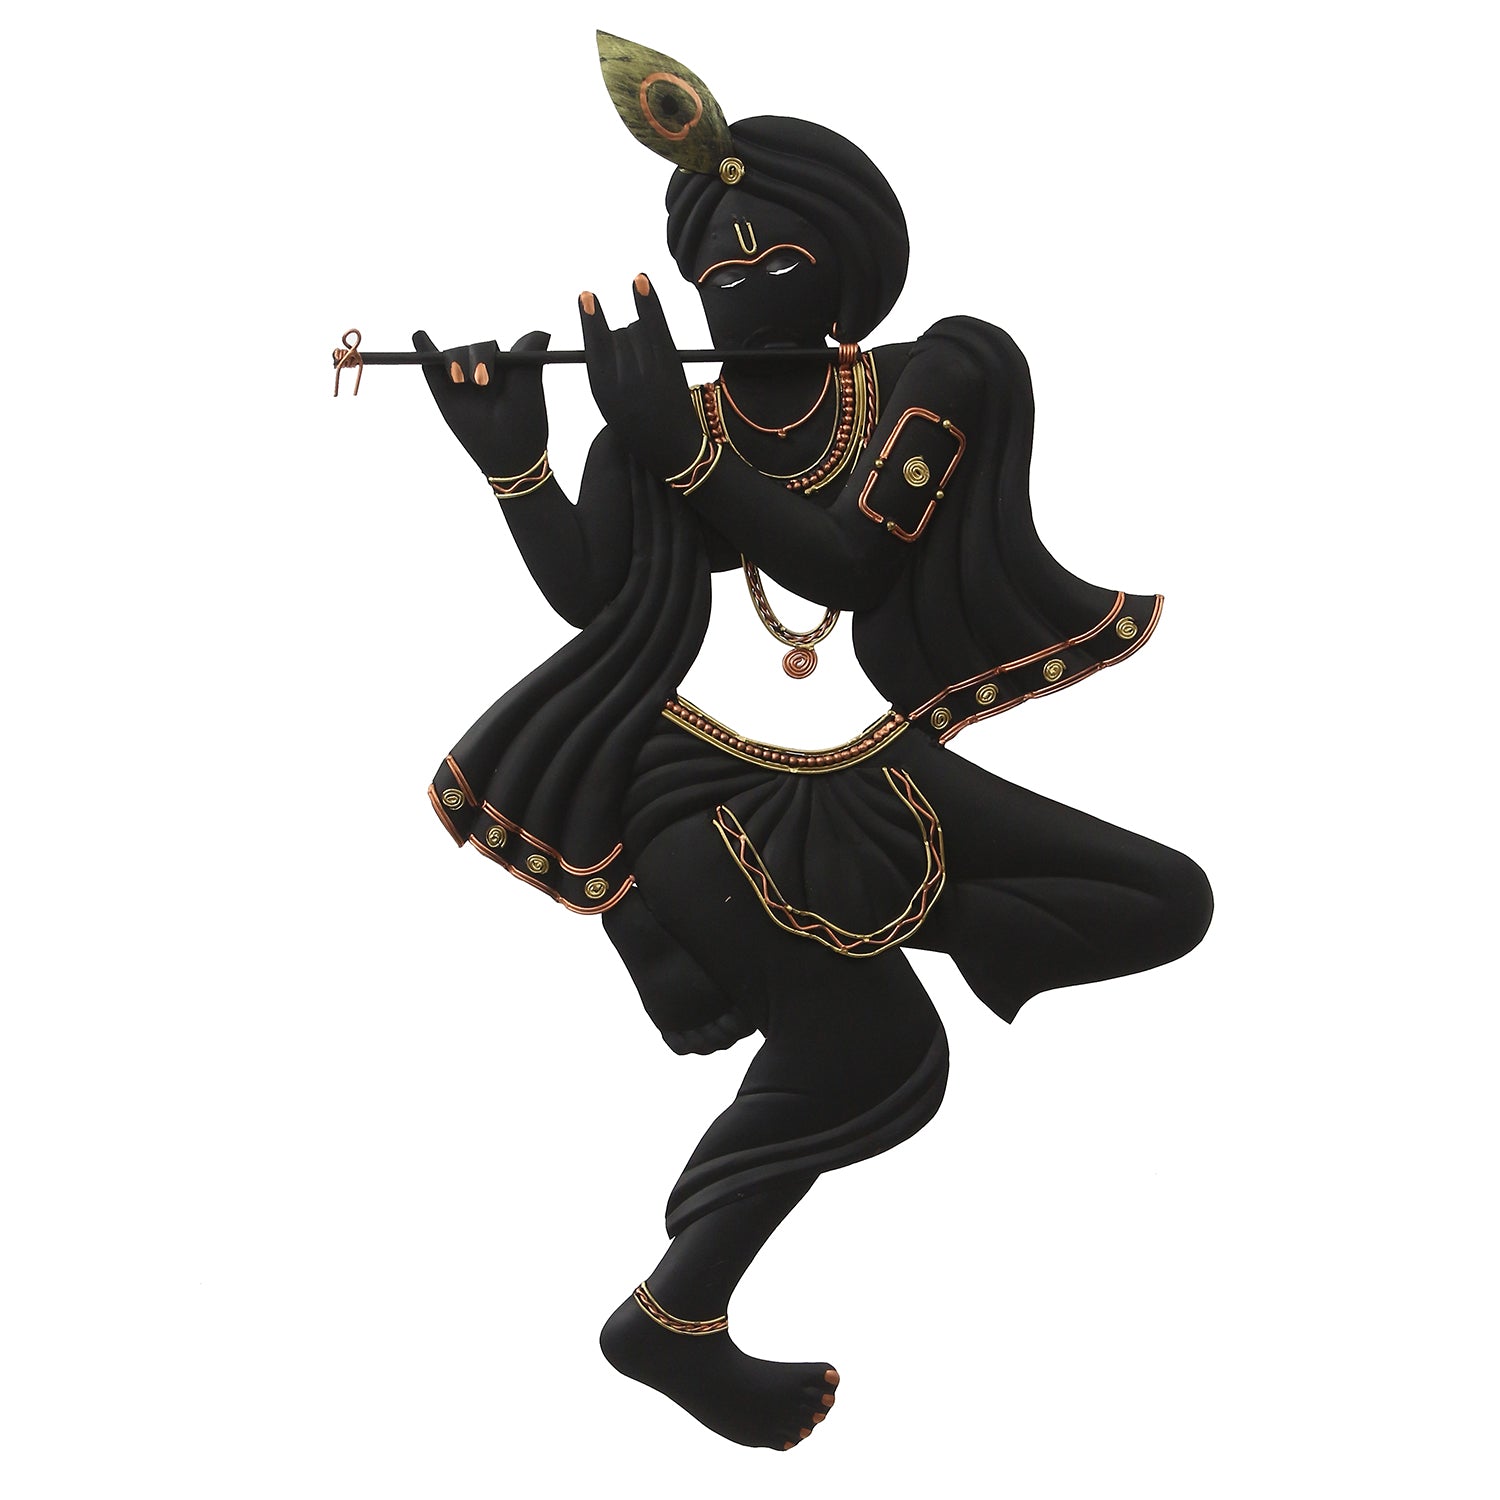 Black Lord Krishna Playing Flute Handcrafted Decorative Iron Wall Hanging/Art 2